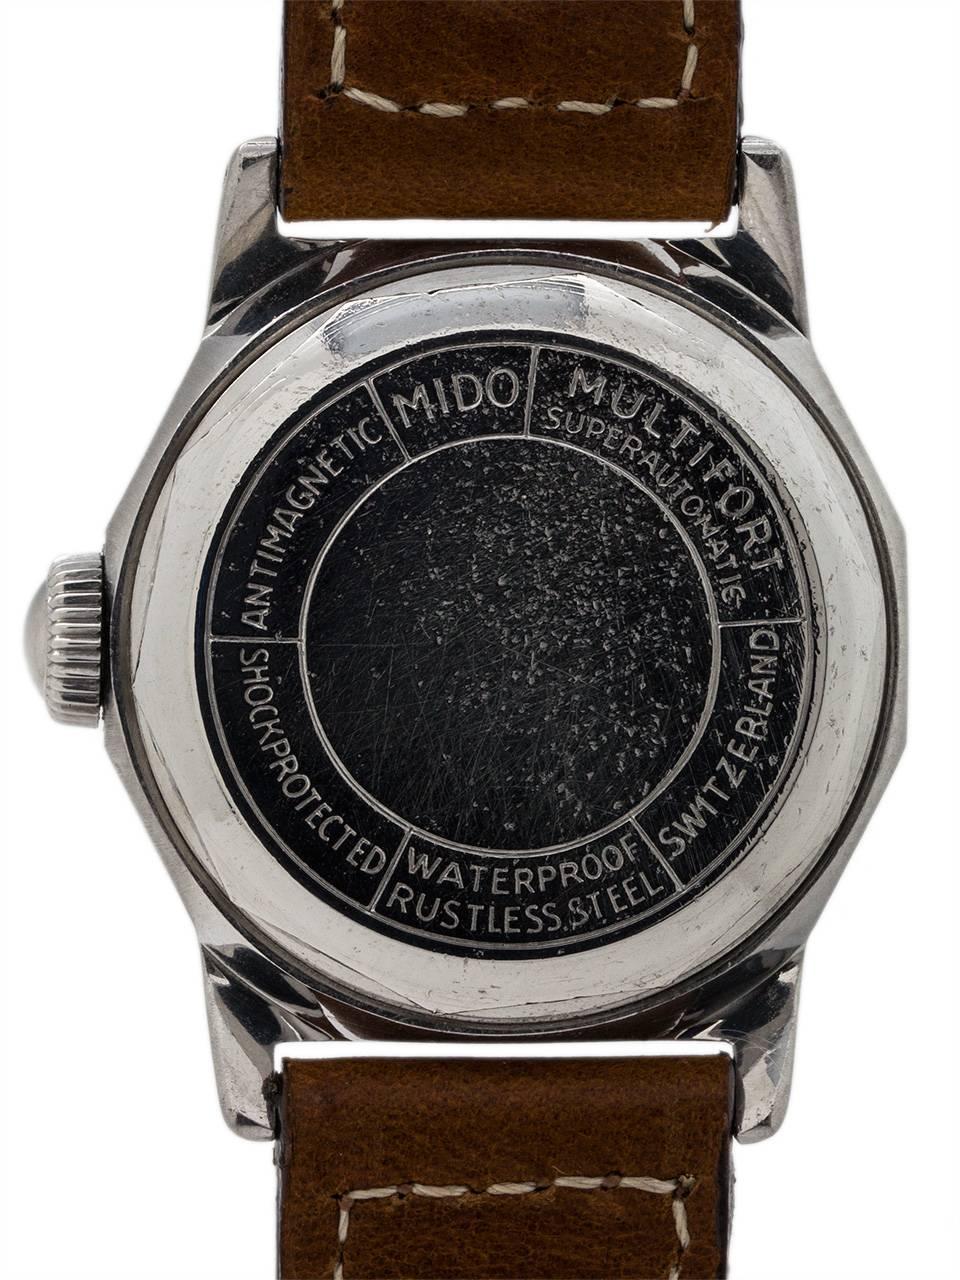 Women's or Men's Mido Stainless Steel Multifort Midsize Automatic Wristwatch, circa 1950s